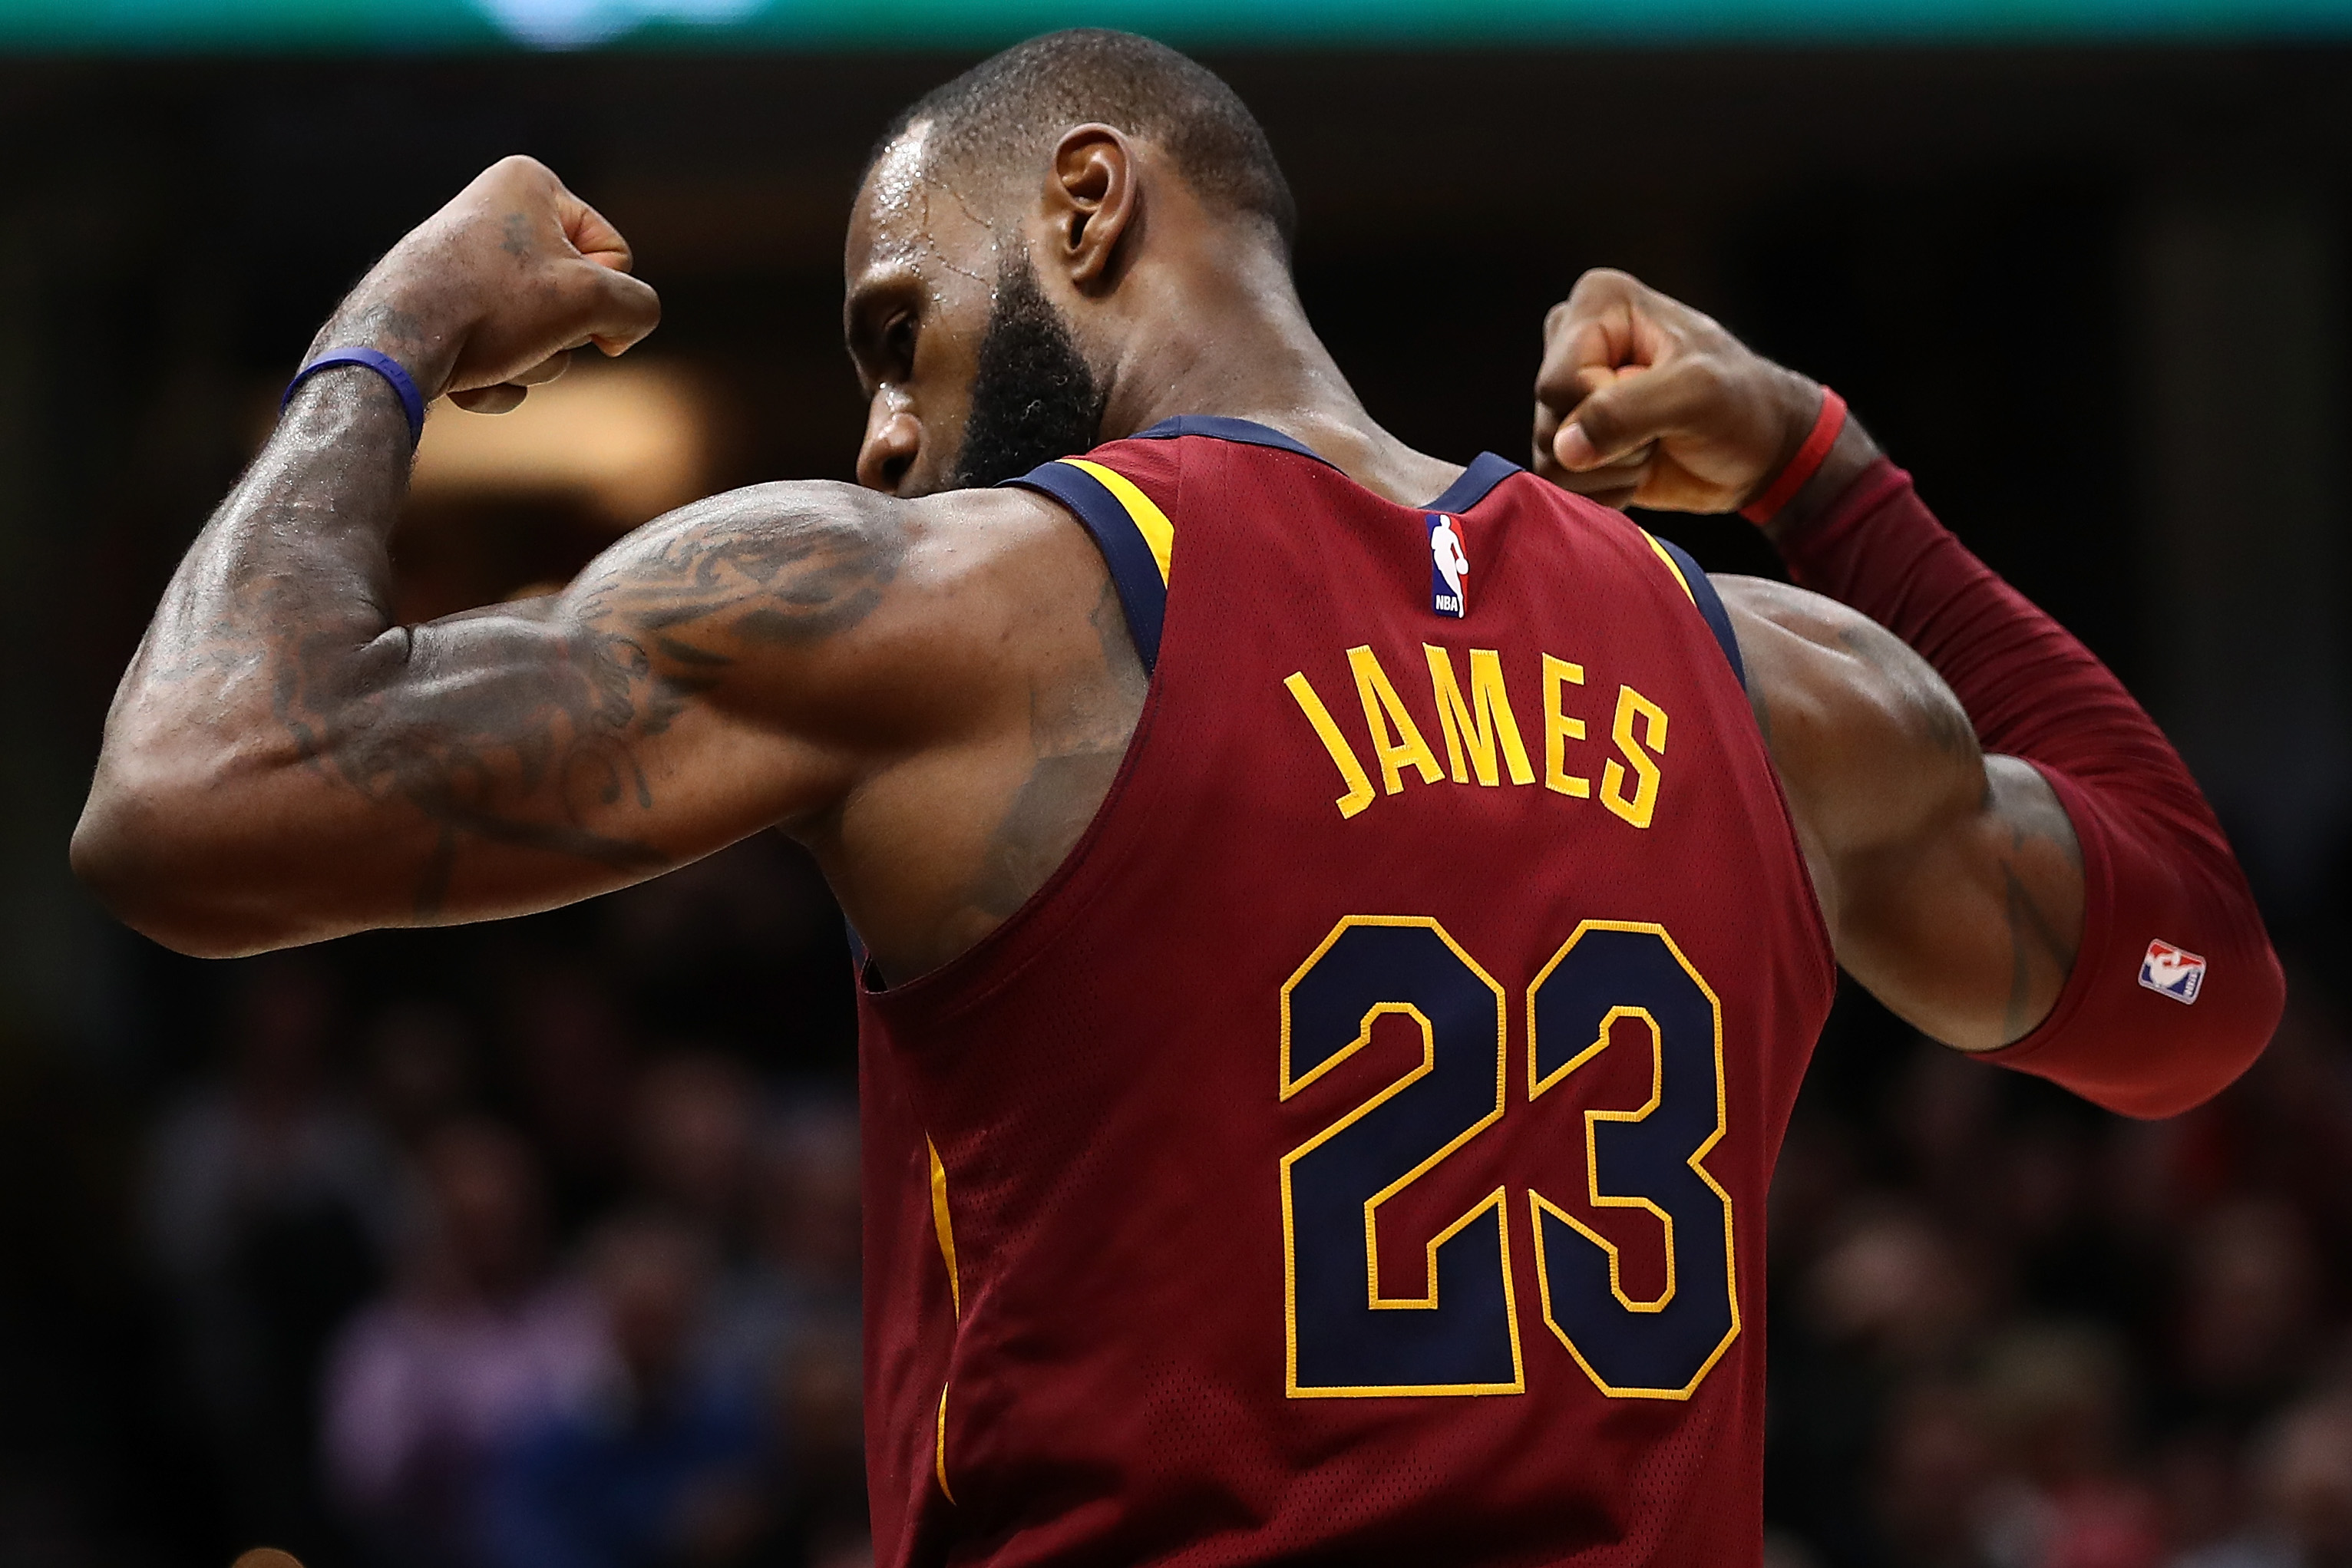 LeBron James #23 of the Cleveland Cavaliers celebrates a second half basket while playing the Indiana Pacers at Quicken Loans Arena on November 1, 2017 in Cleveland, Ohio. (Gregory Shamus&mdash;Getty Images)